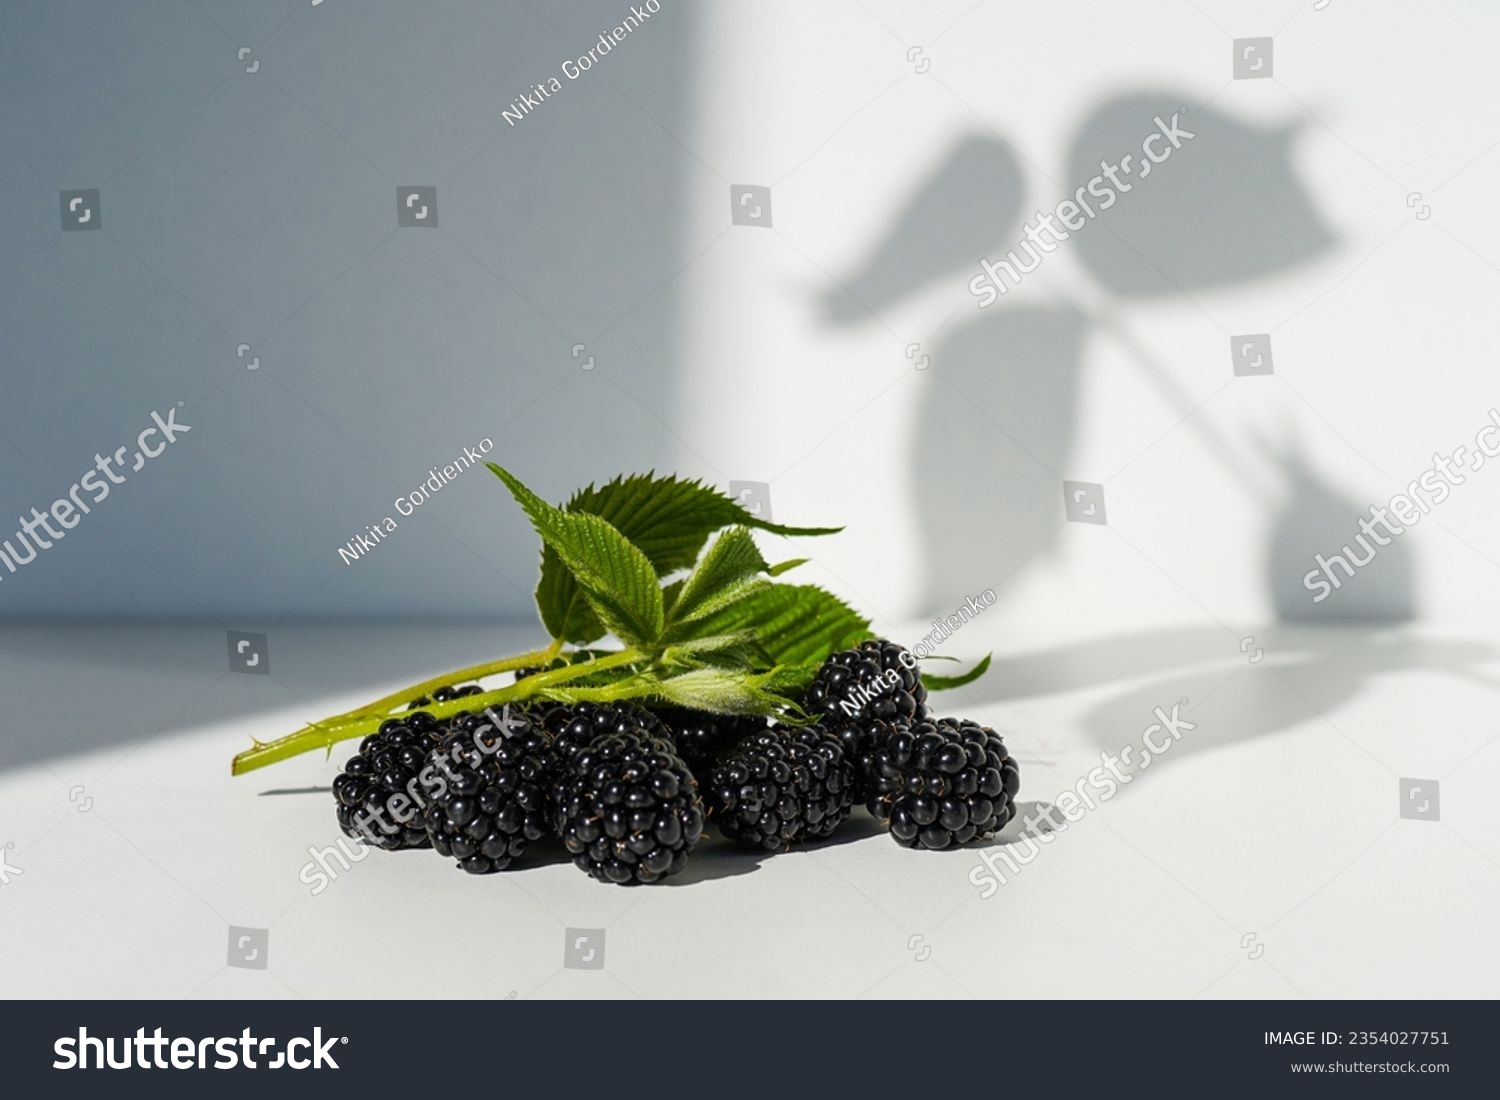 A bunch of ripe blackberries with leaves. Blackberries in a pile on a white background. Blackberries With White Leaves. Selective focus. #2354027751